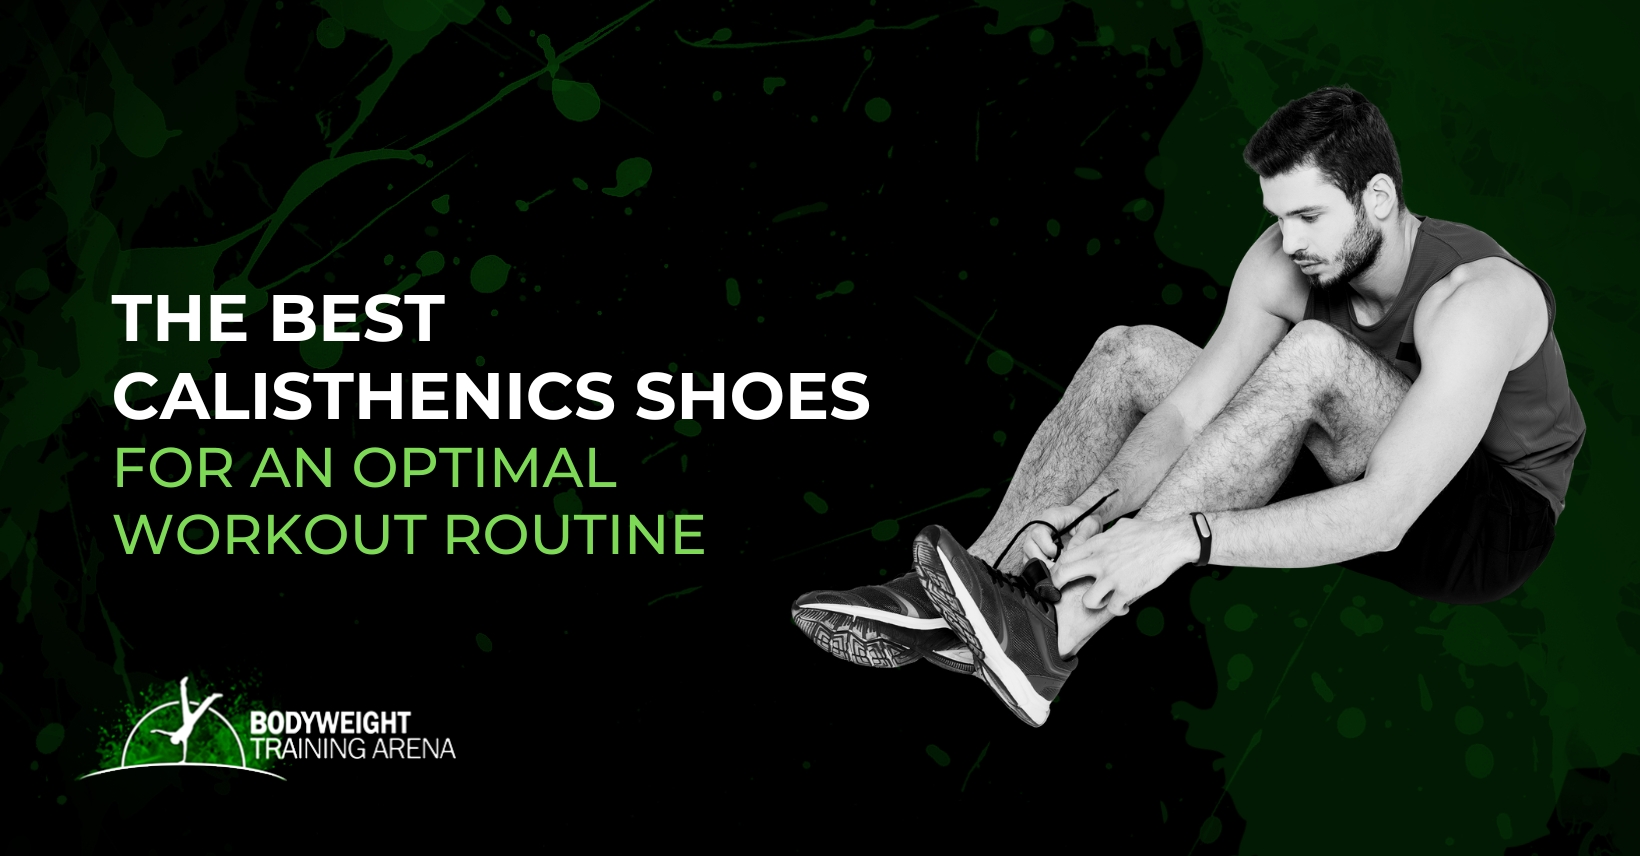 The Best Calisthenics Shoes for an Optimal Workout Routine